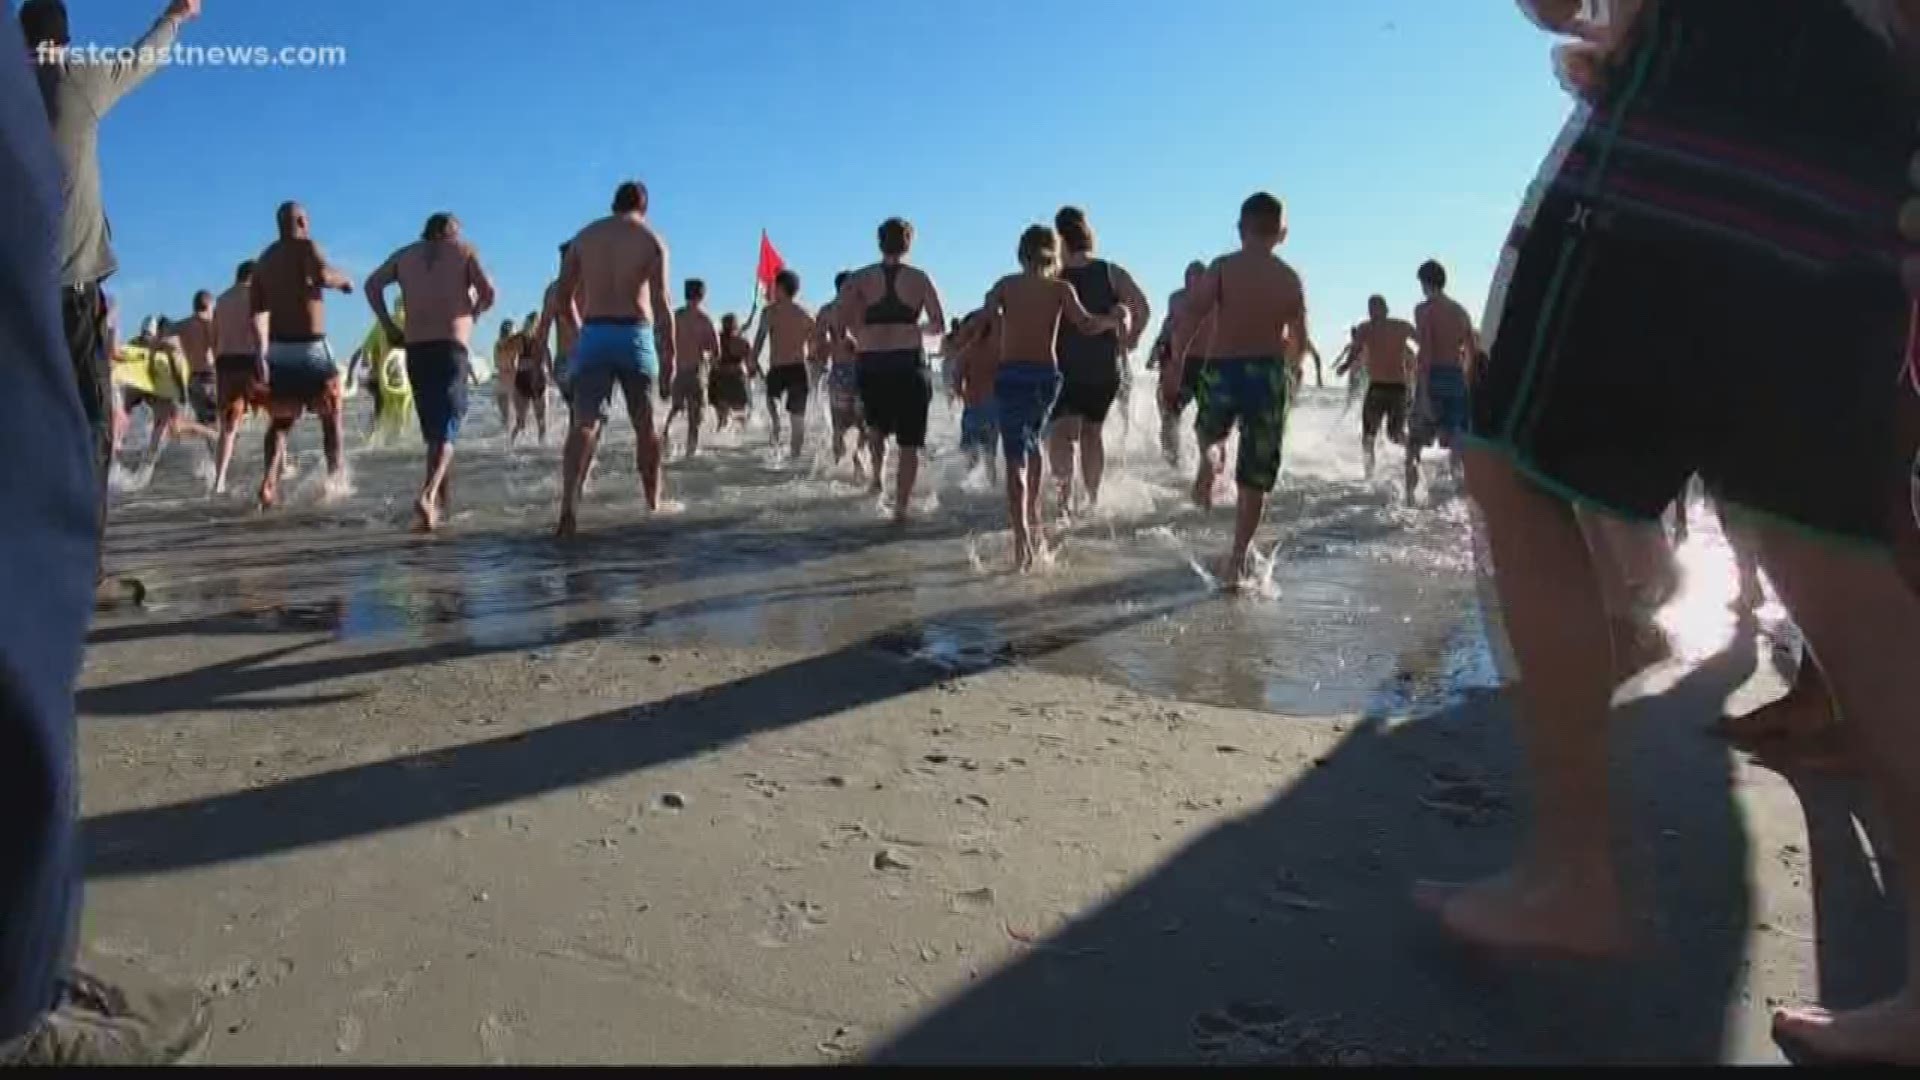 It was a chilly 63 degrees in the Atlantic Ocean as hundreds gathered at Jacksonville Beach to participate in the 31st Annual Polar Plunge.